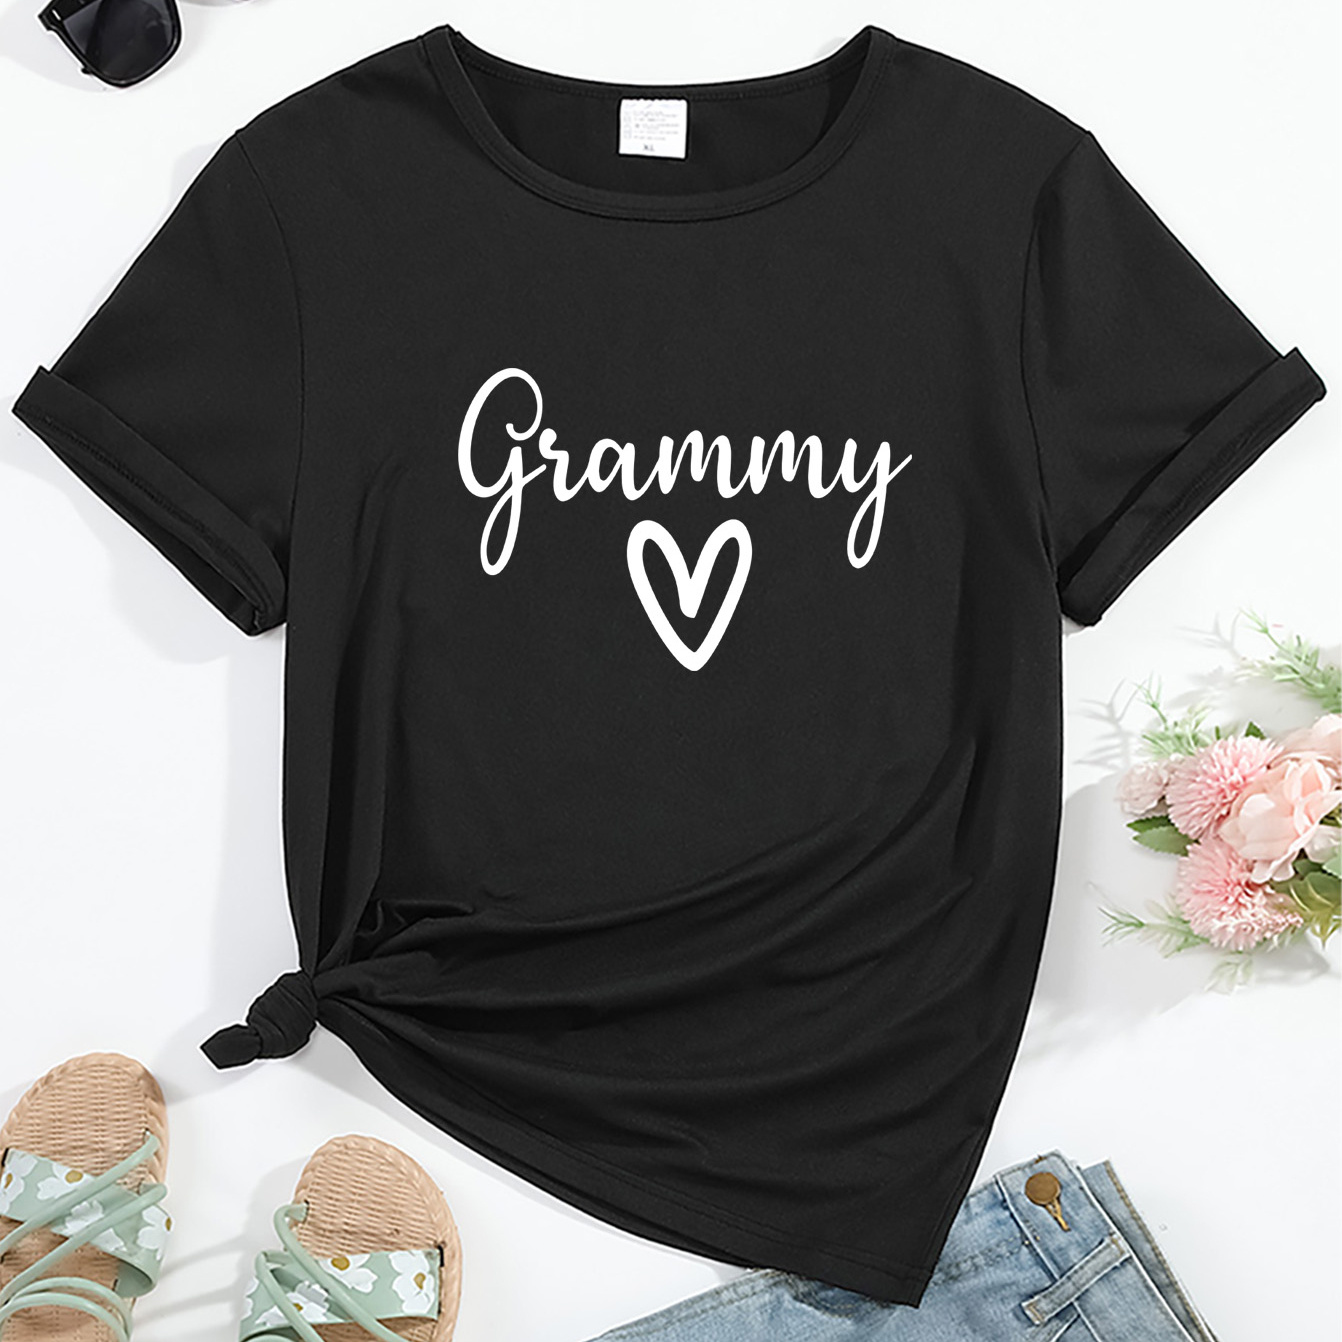 

Women's Casual Round Neck Short Sleeve T-shirt With Geometric "grammy" Heart Design, Comfortable, Fashionable Top For Daily Wear